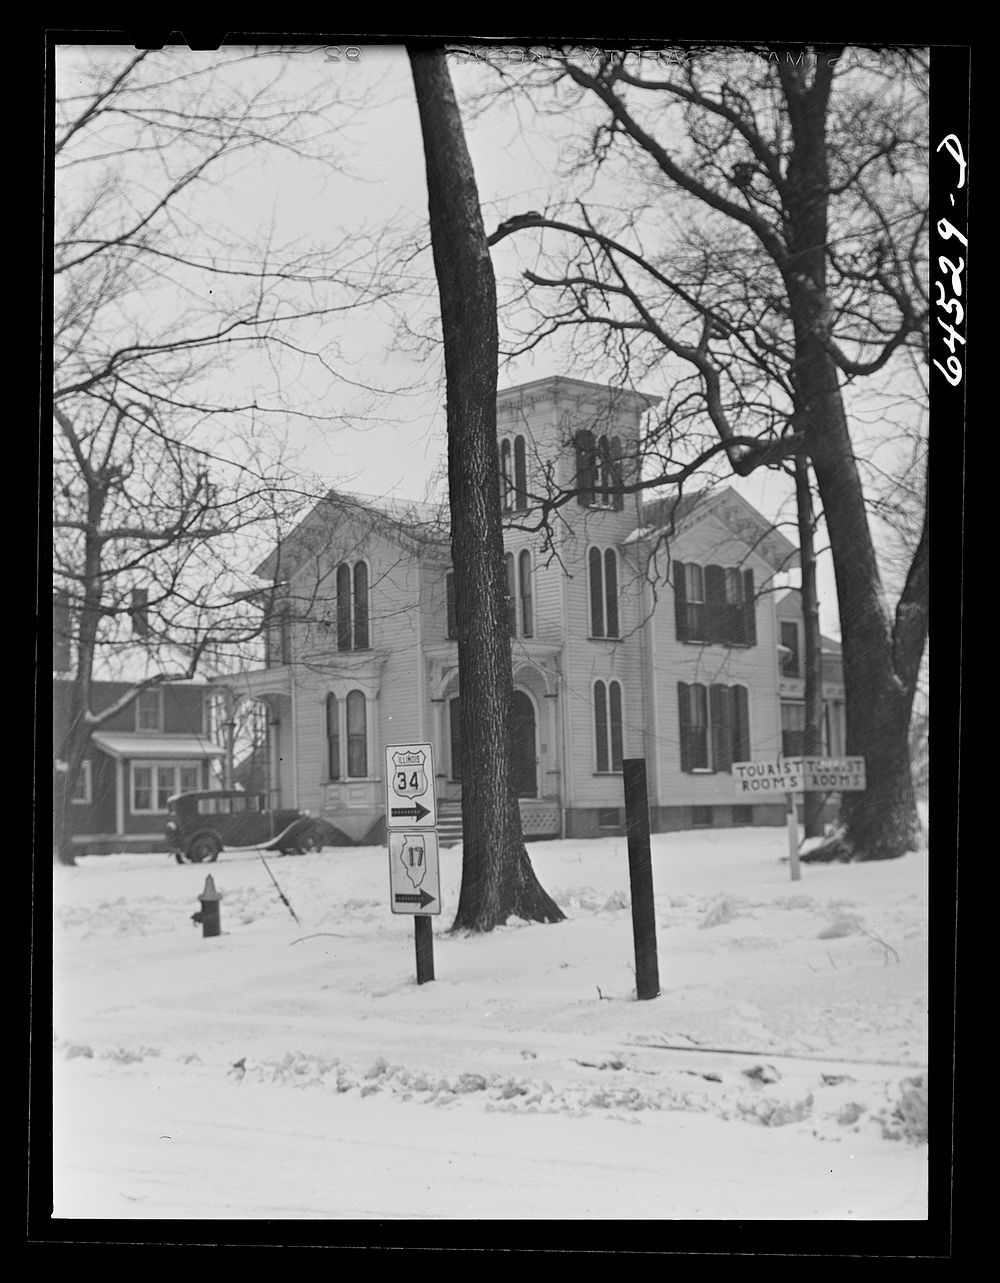 [Untitled photo, possibly related to: Volta, Illinois. Residential section]. Sourced from the Library of Congress.